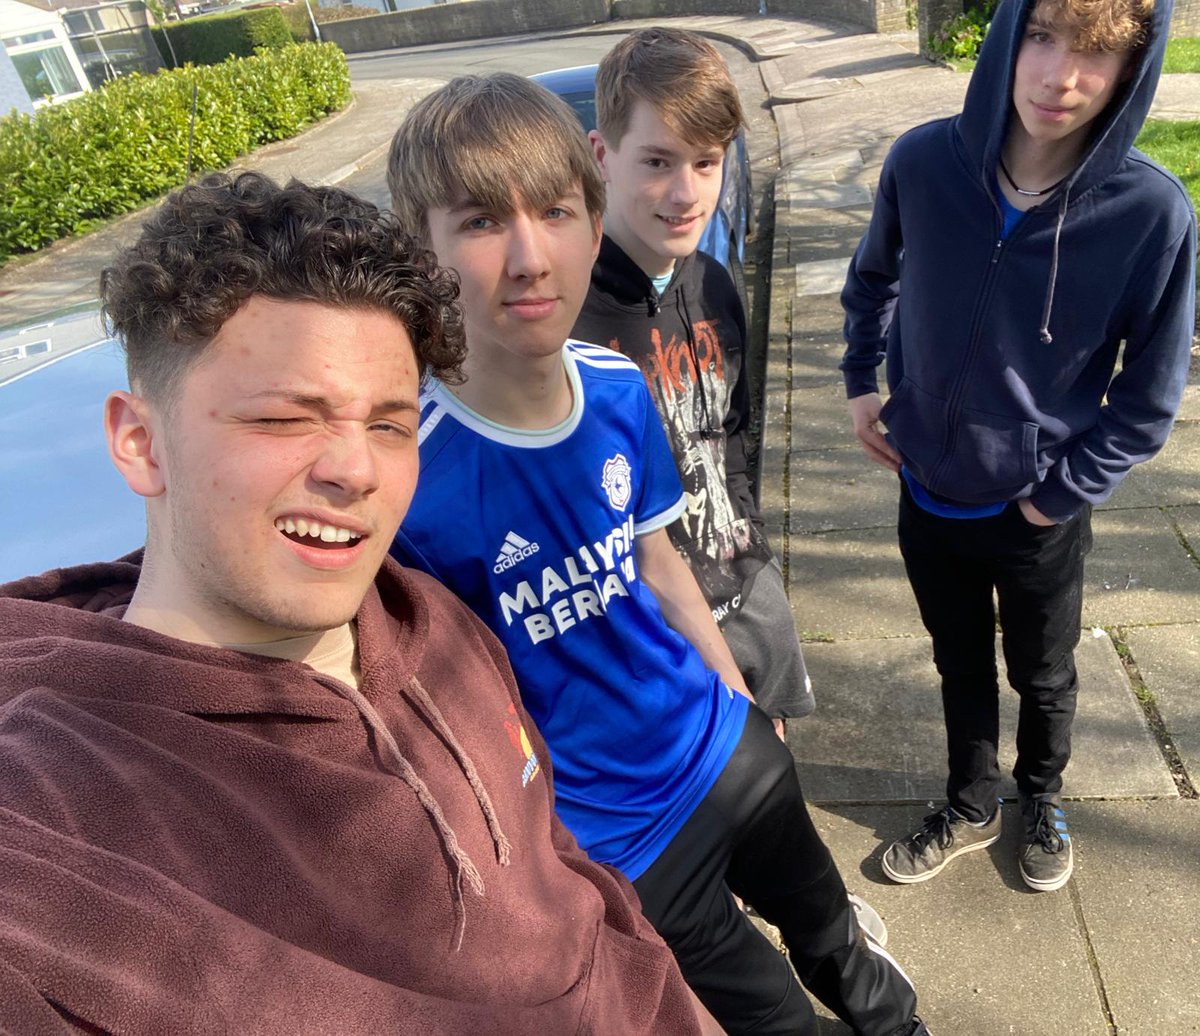 Phone onto camera mode and we managed a Selfie! 👌📱#the8_48 #unsignedband #newbands #selfie